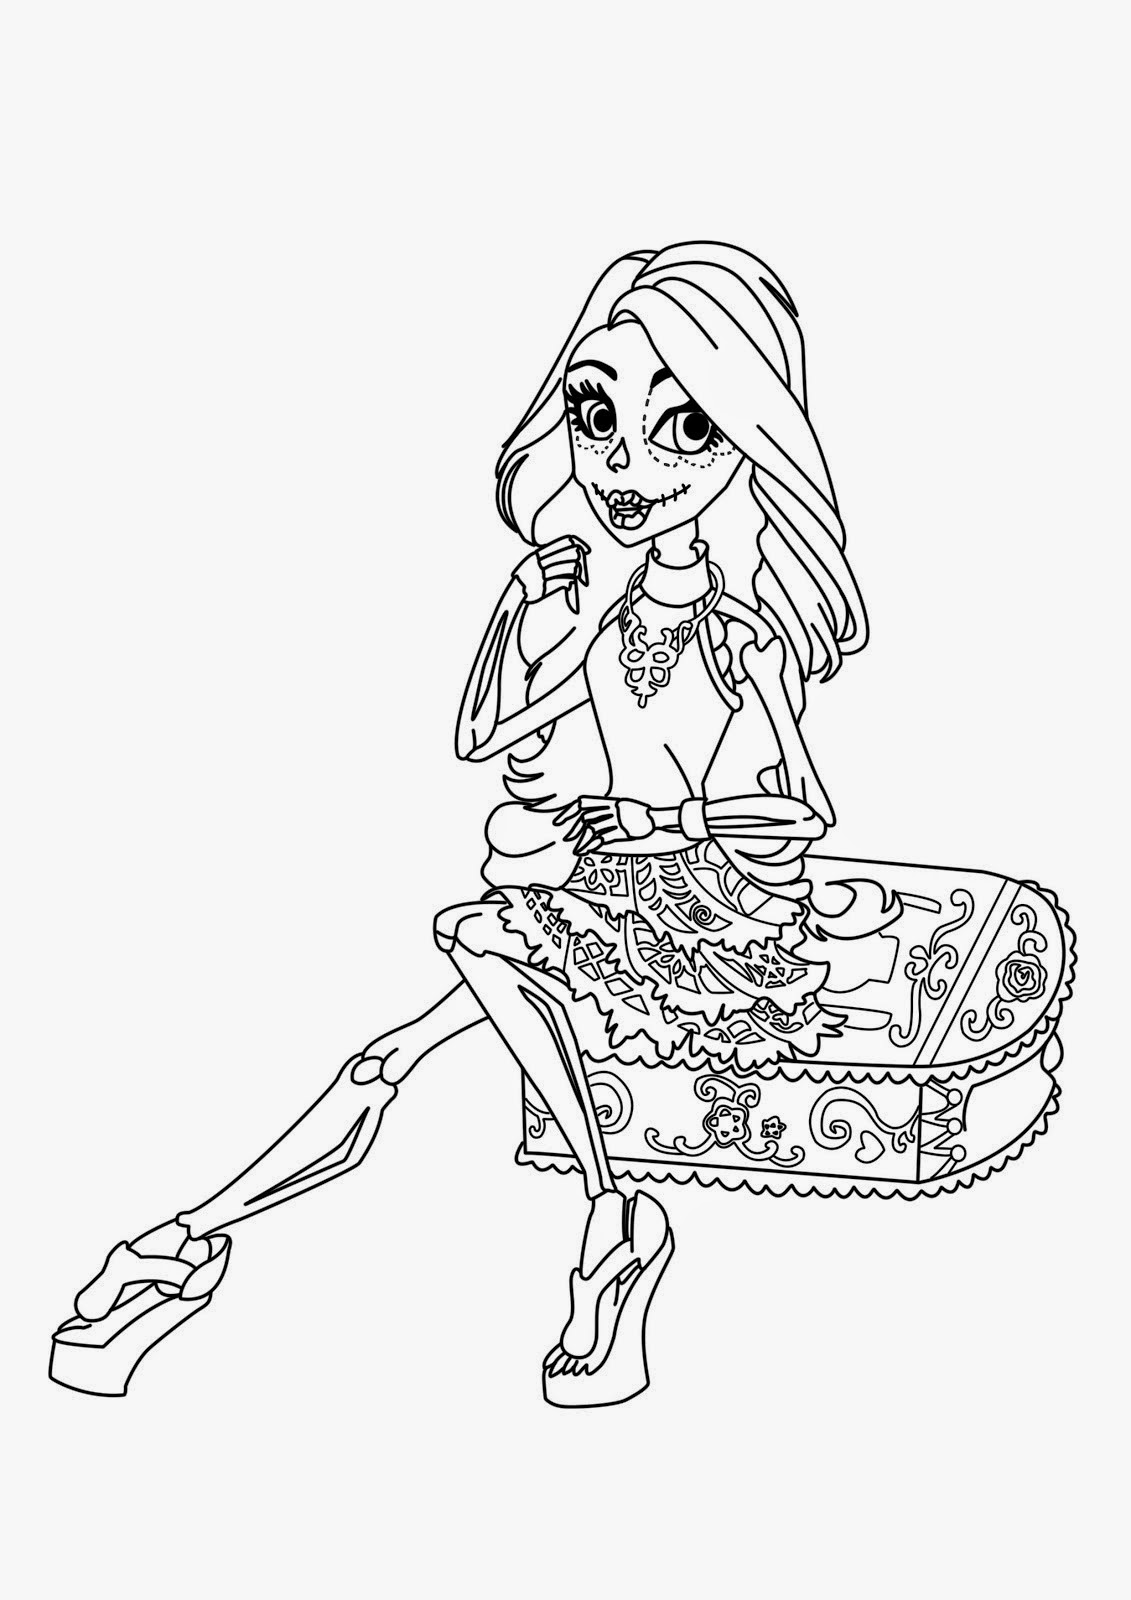 Download Coloring Pages: Monster High Coloring Pages Free and Printable